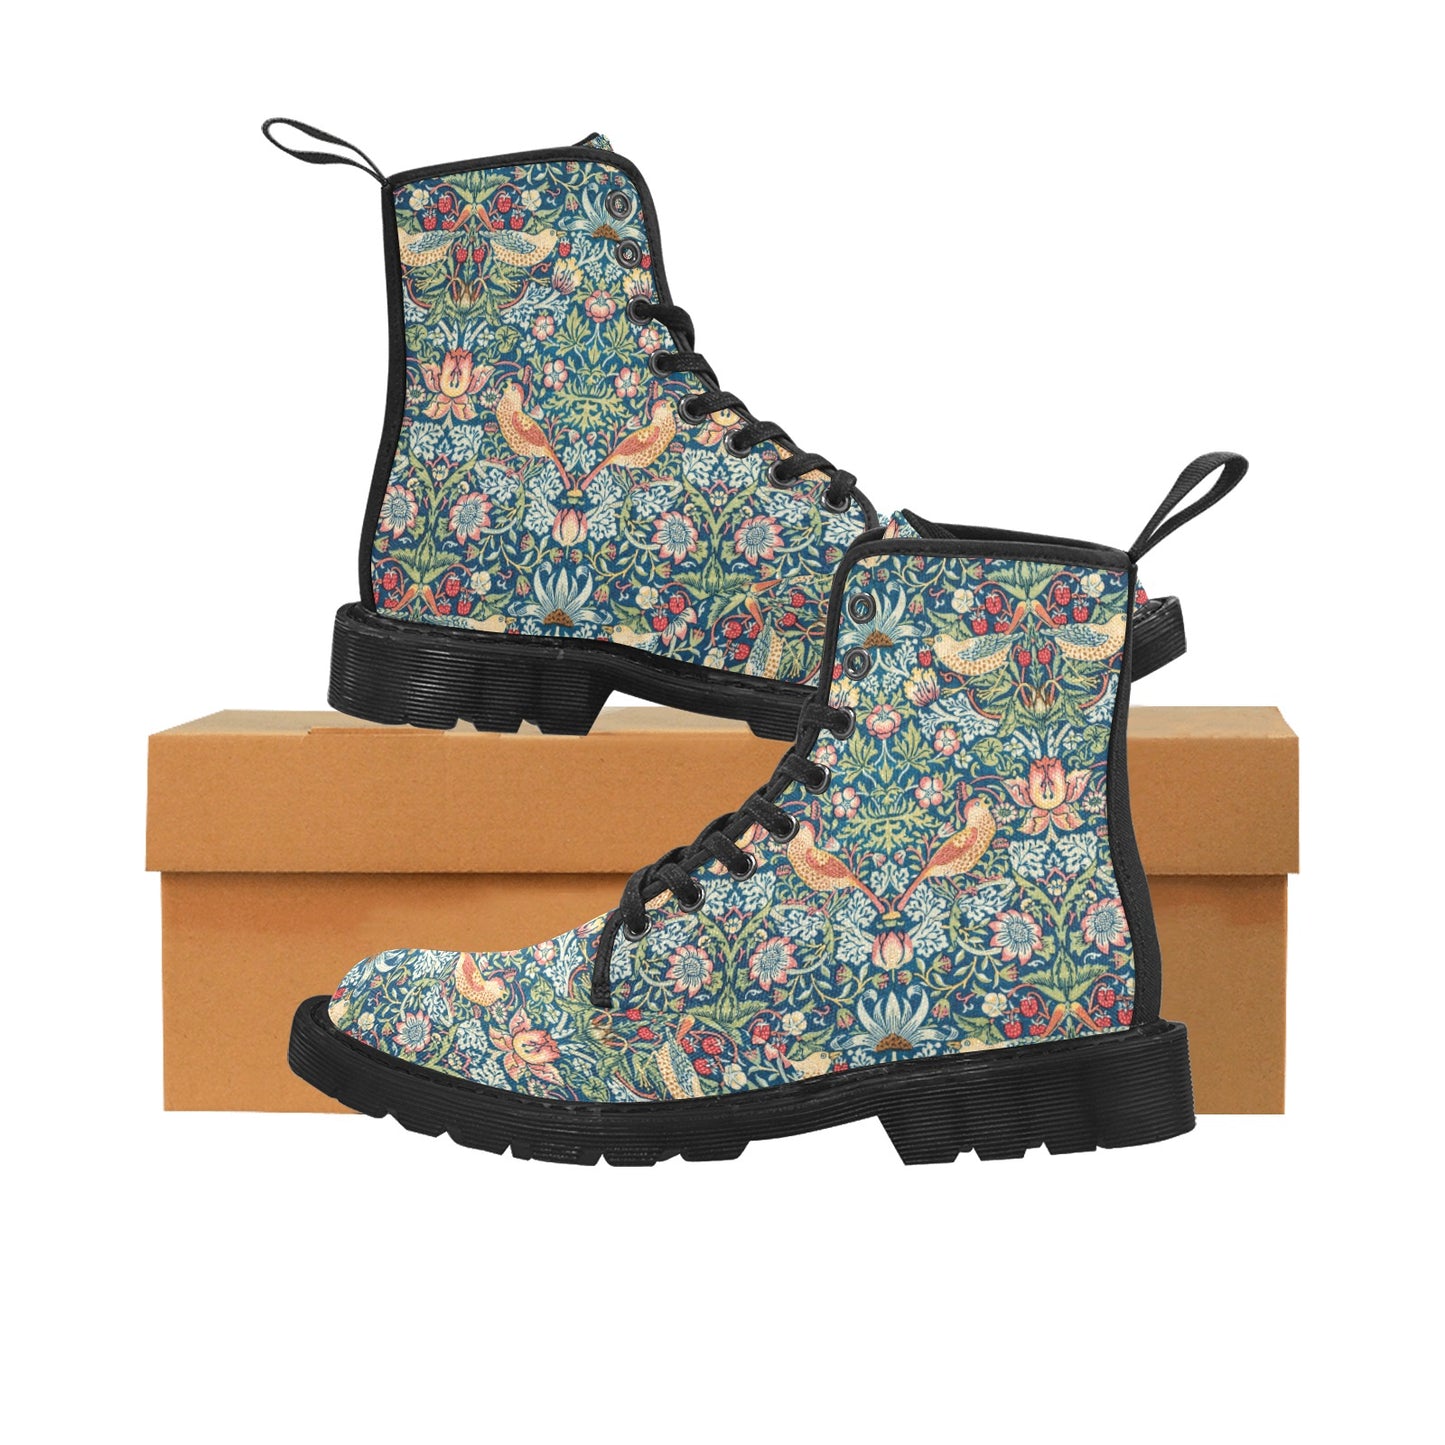 Women’s Flowered Canvas Boots with Strawberry Thief William Morris Wallpaper Design